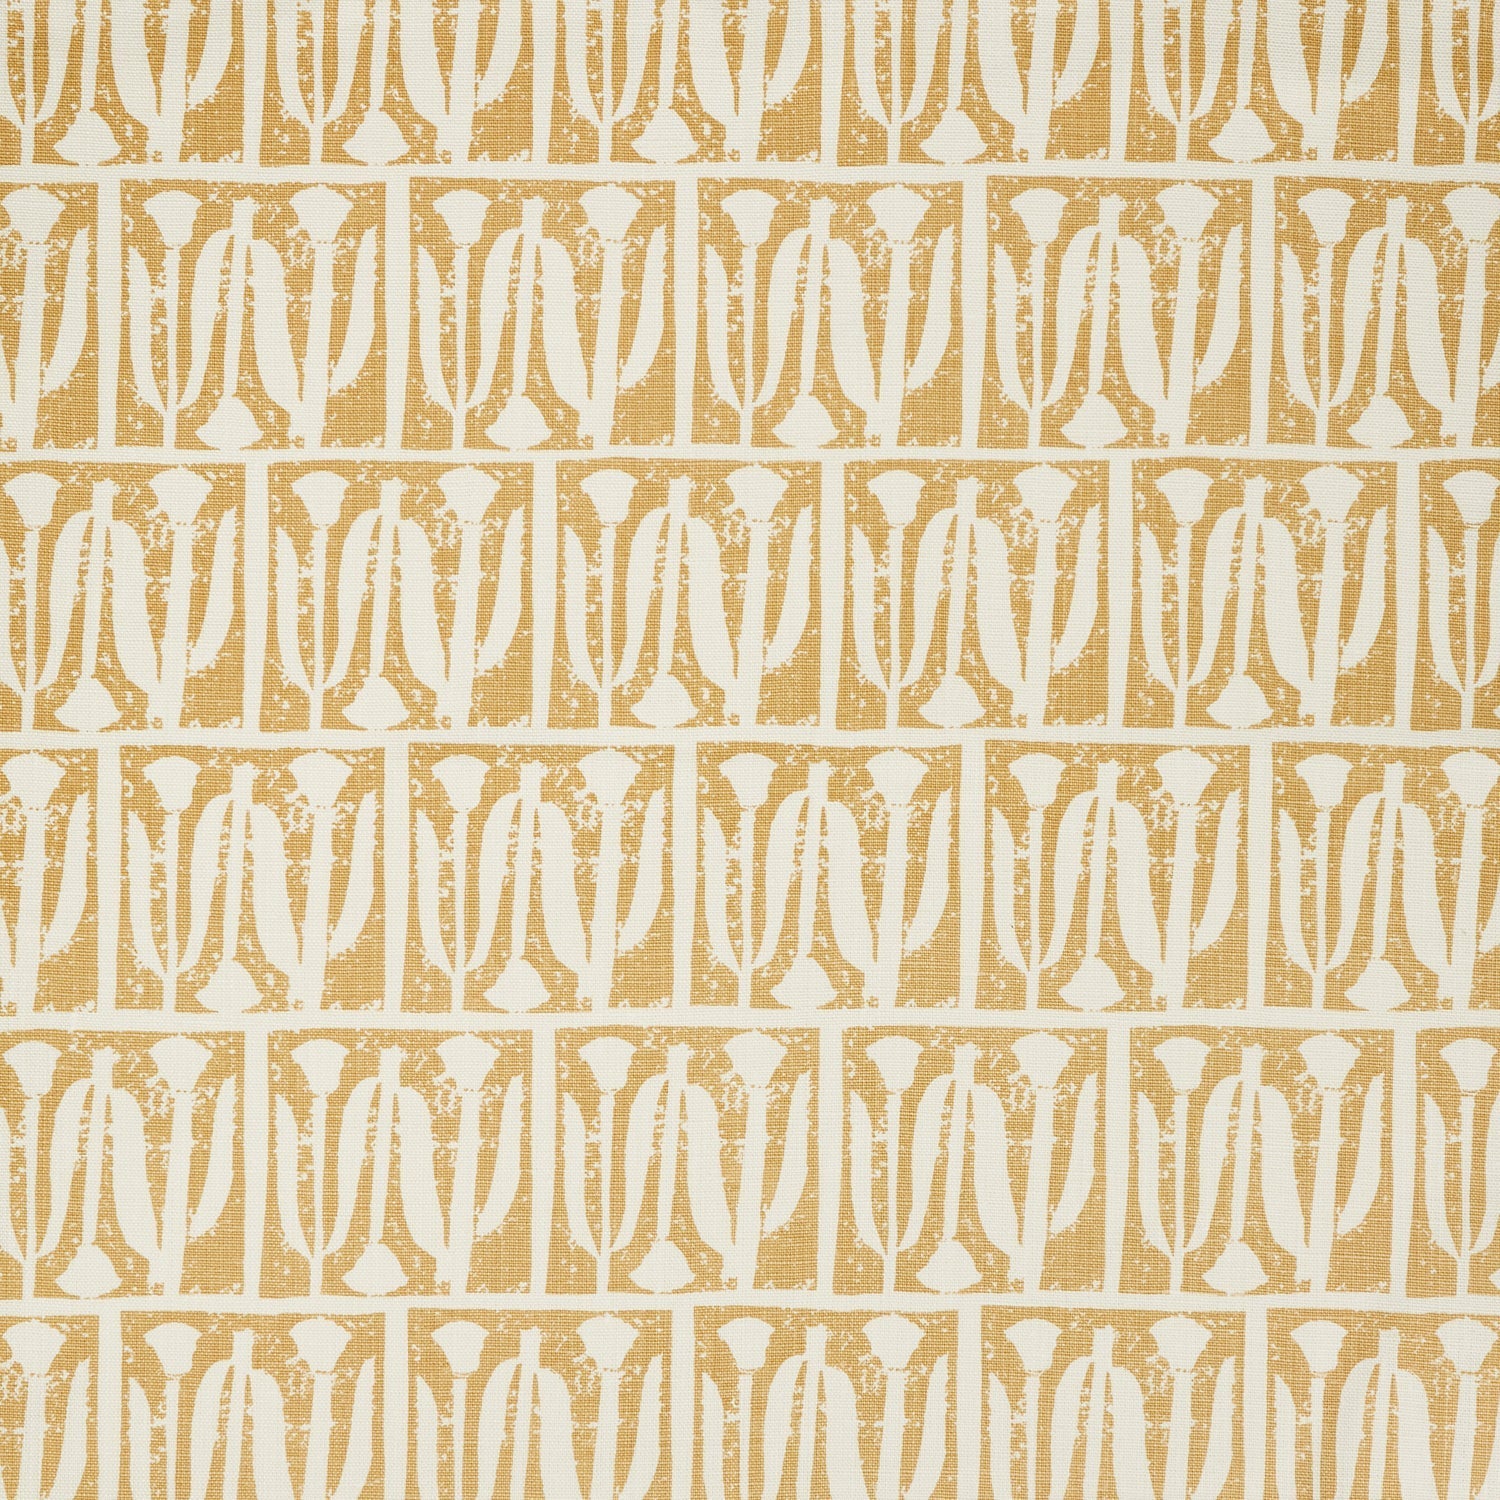 Woven fabric swatch in an abstract tulip print in a repeating stripe on a light orange field.